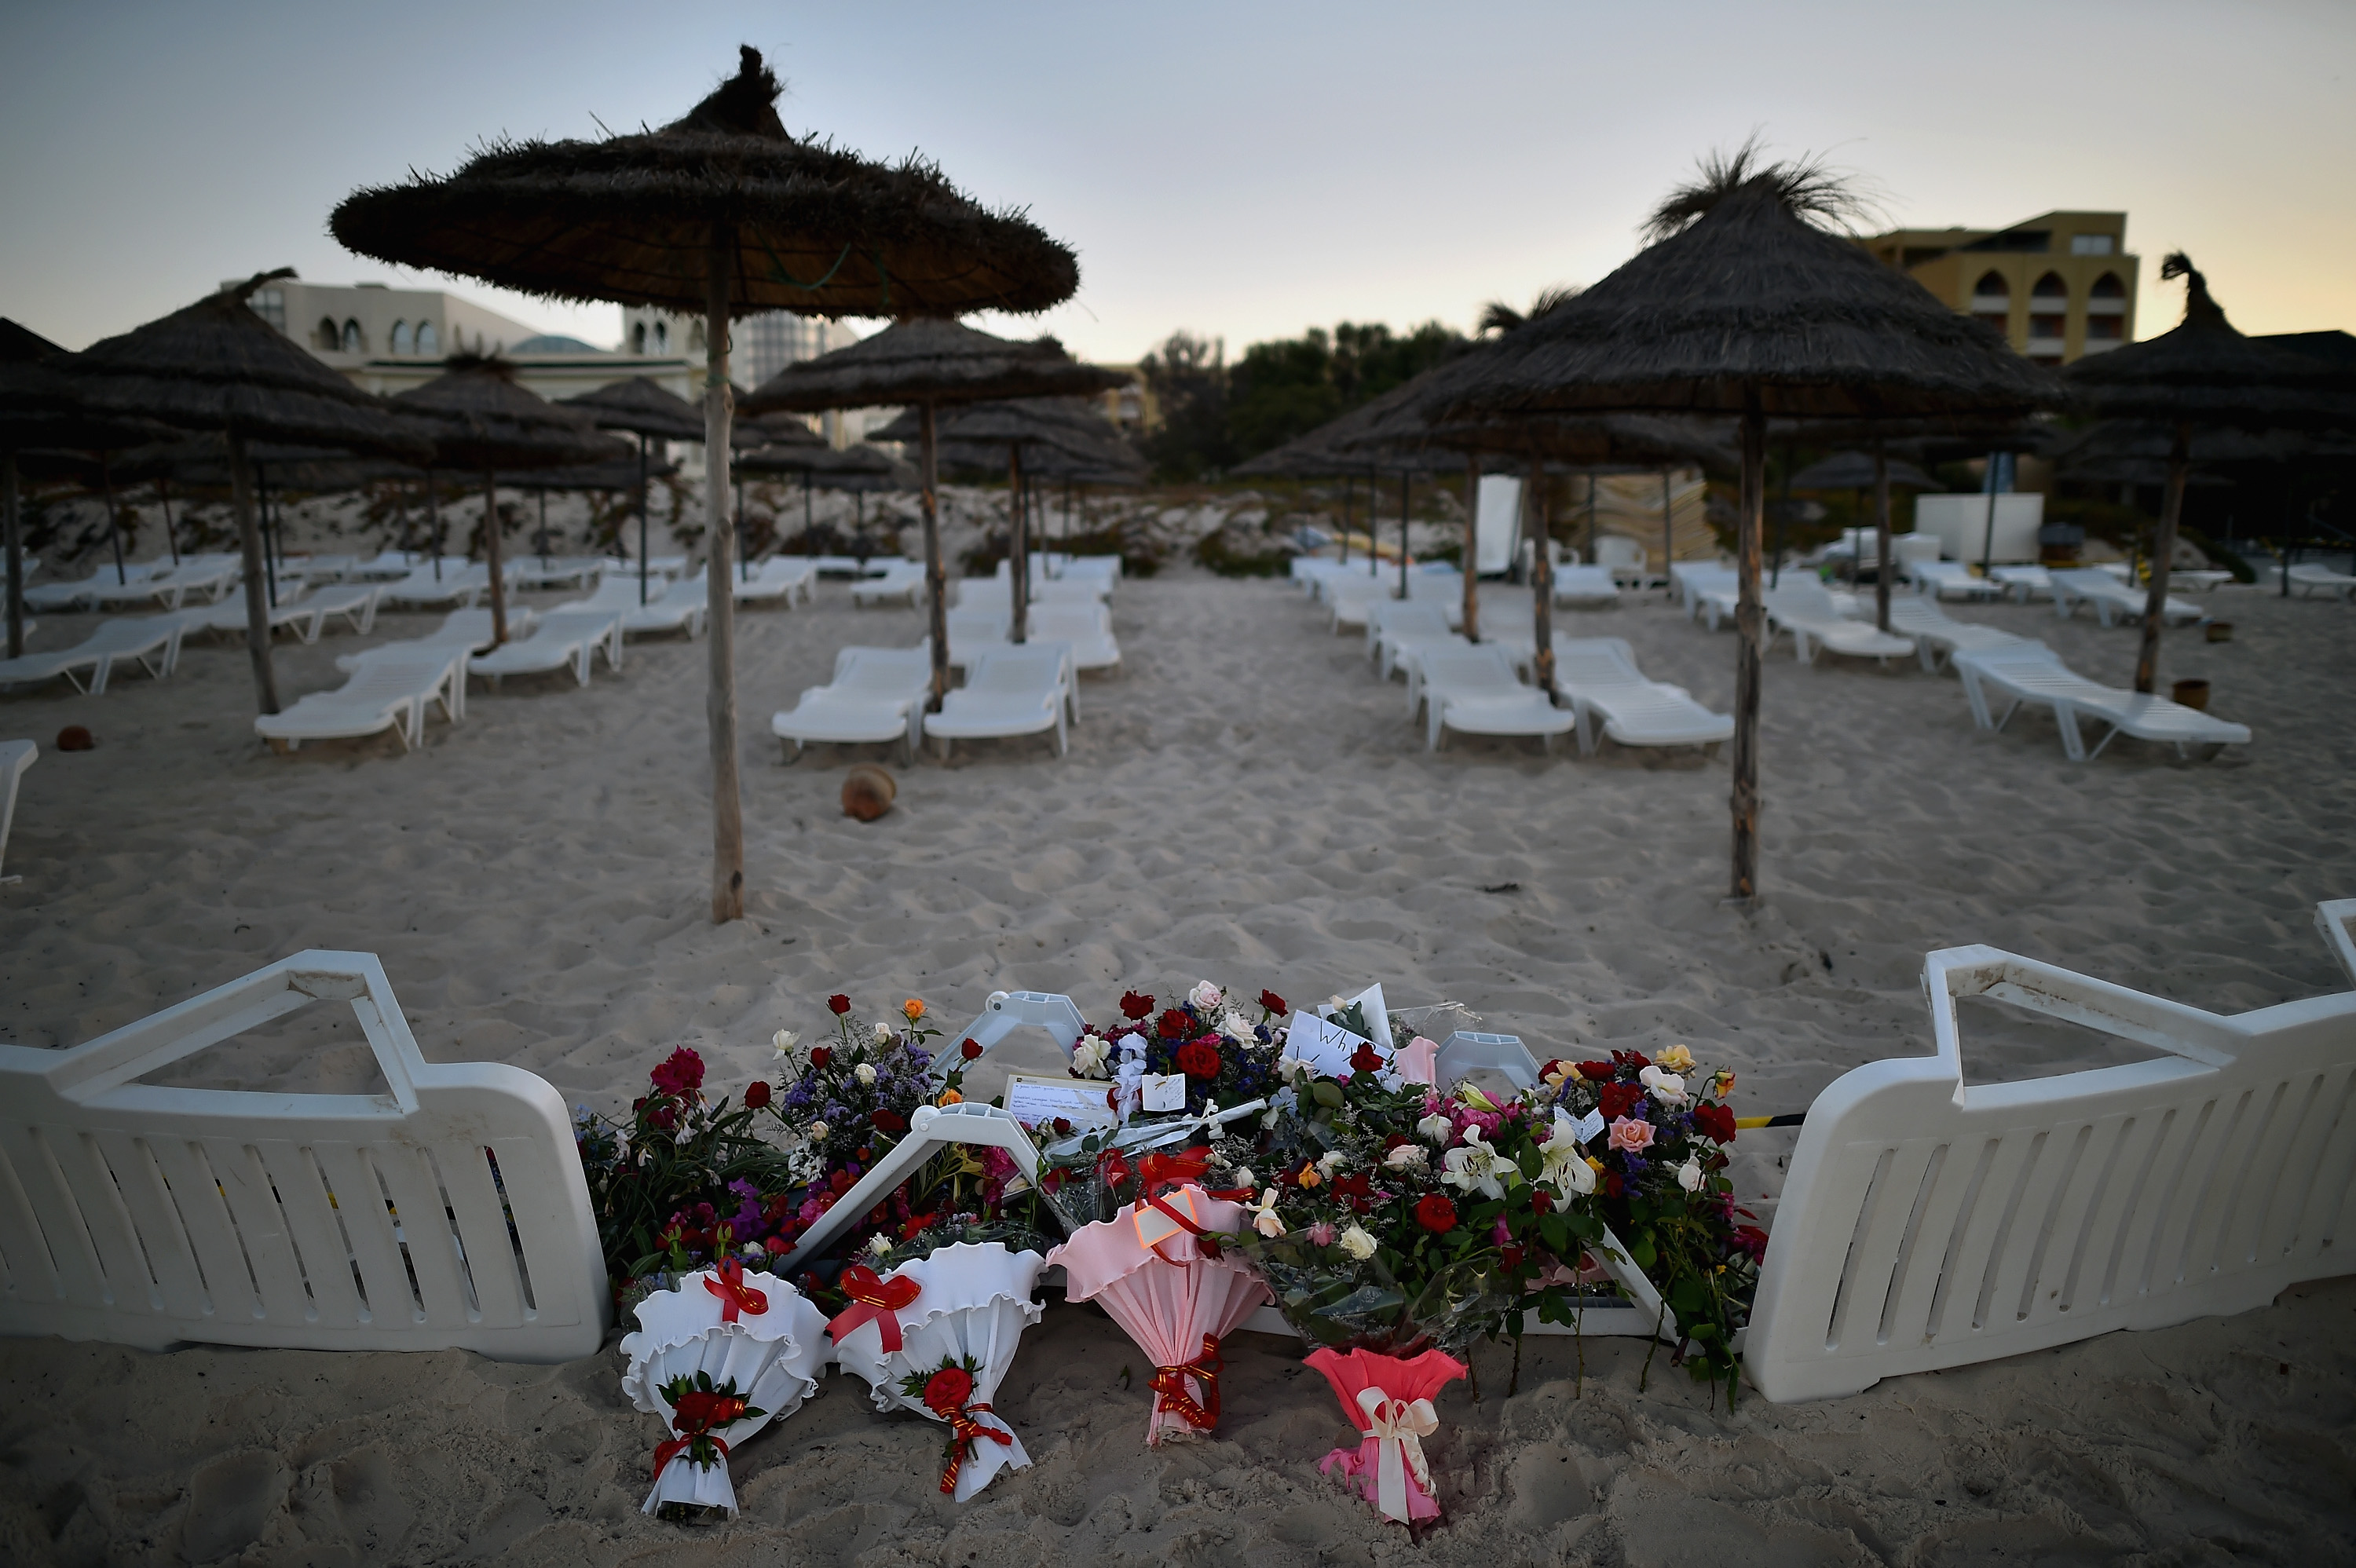 Flowers are placed on June 27, 2015, at the beach next to the Imperial Marhaba Hotel in Sousse, Tunisia, where 38 people were killed in a terrorist attack a day earlier (Jeff J Mitchell—Getty Images)